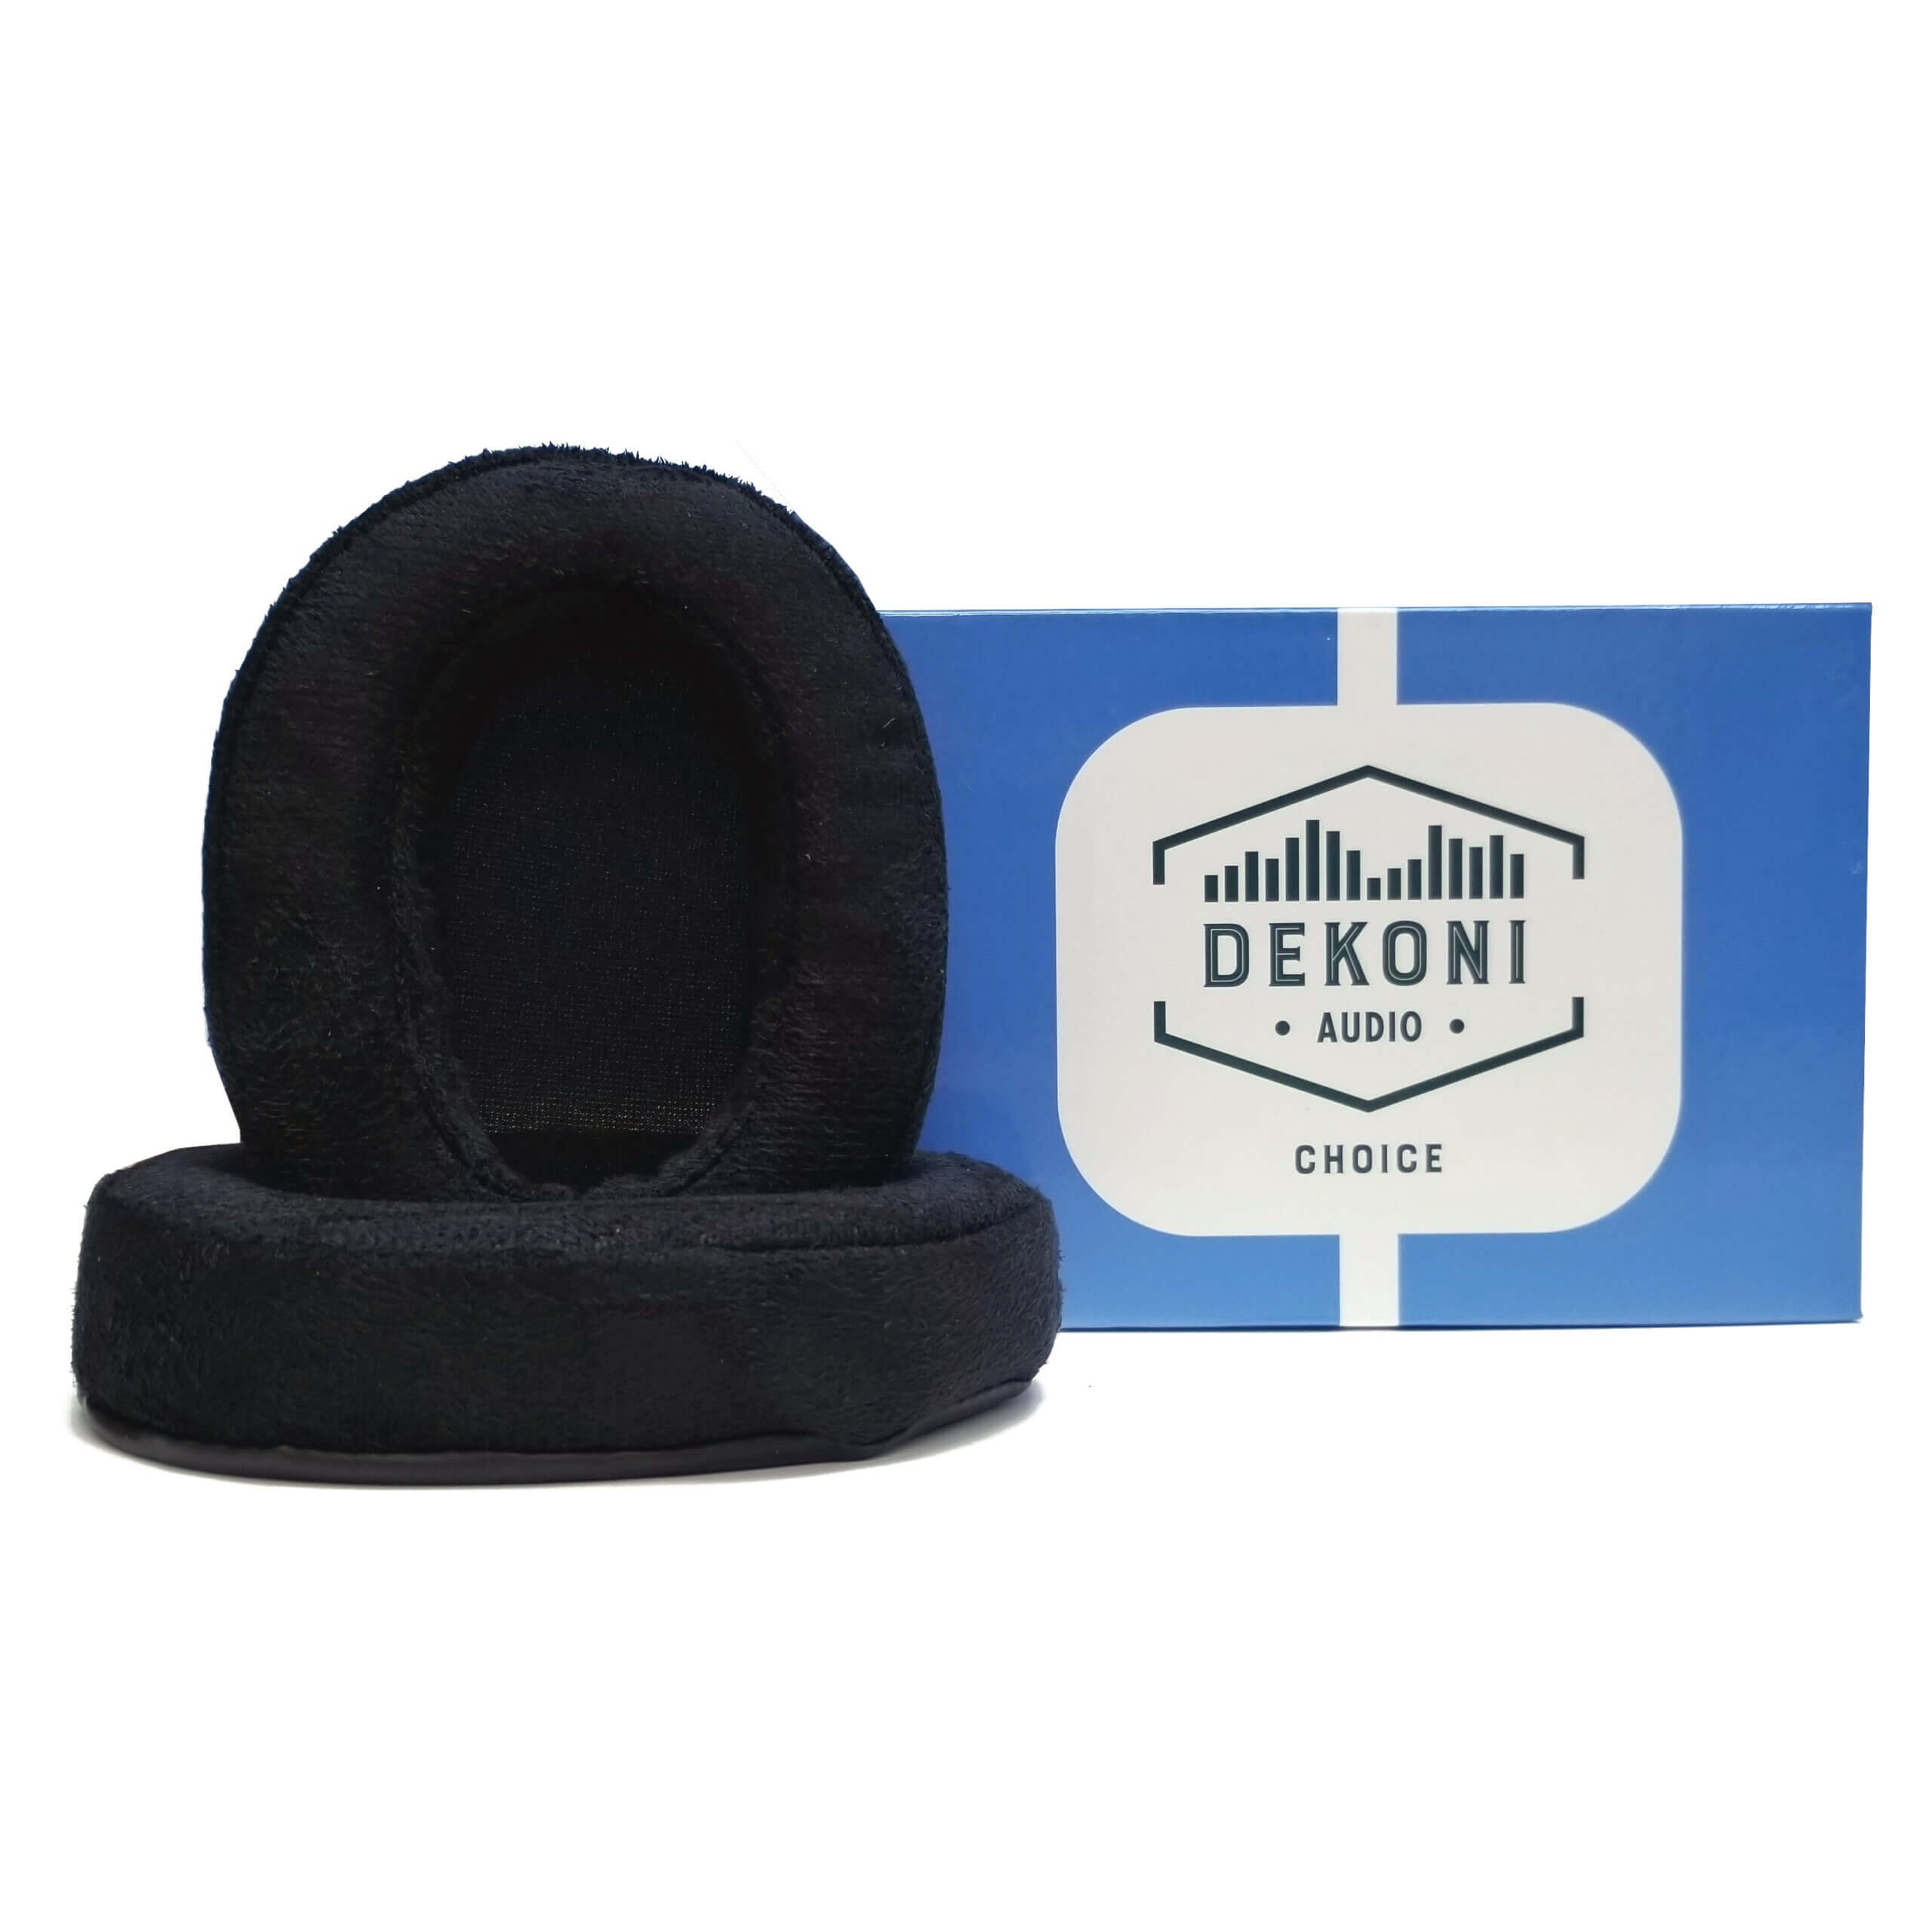 Dekoni Choice Suede replacement earpads for the Audio Technica ATH